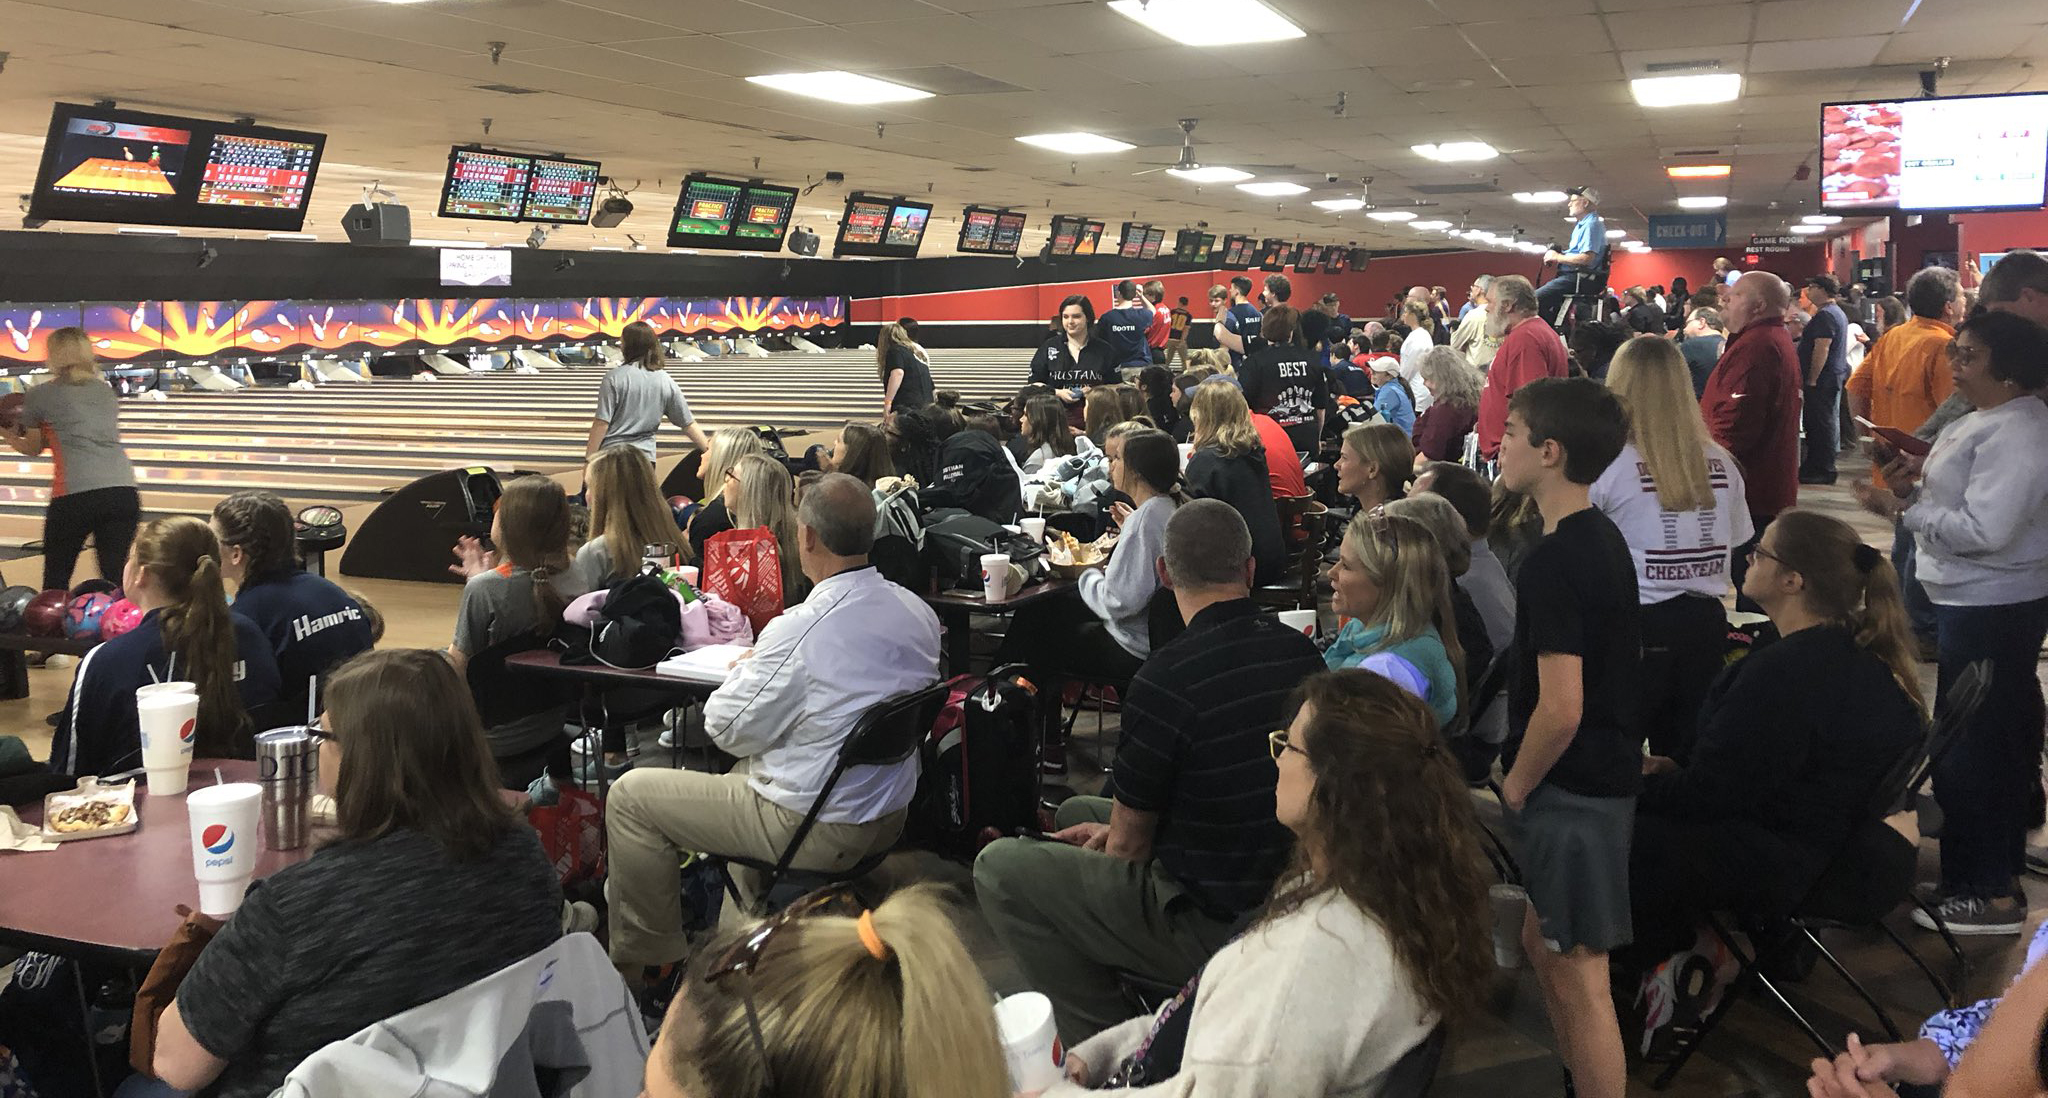 Hewitt-Trussville boys' bowling qualifies in 4th place on first day of 2020 AHSAA North Regional Bowling Tournament